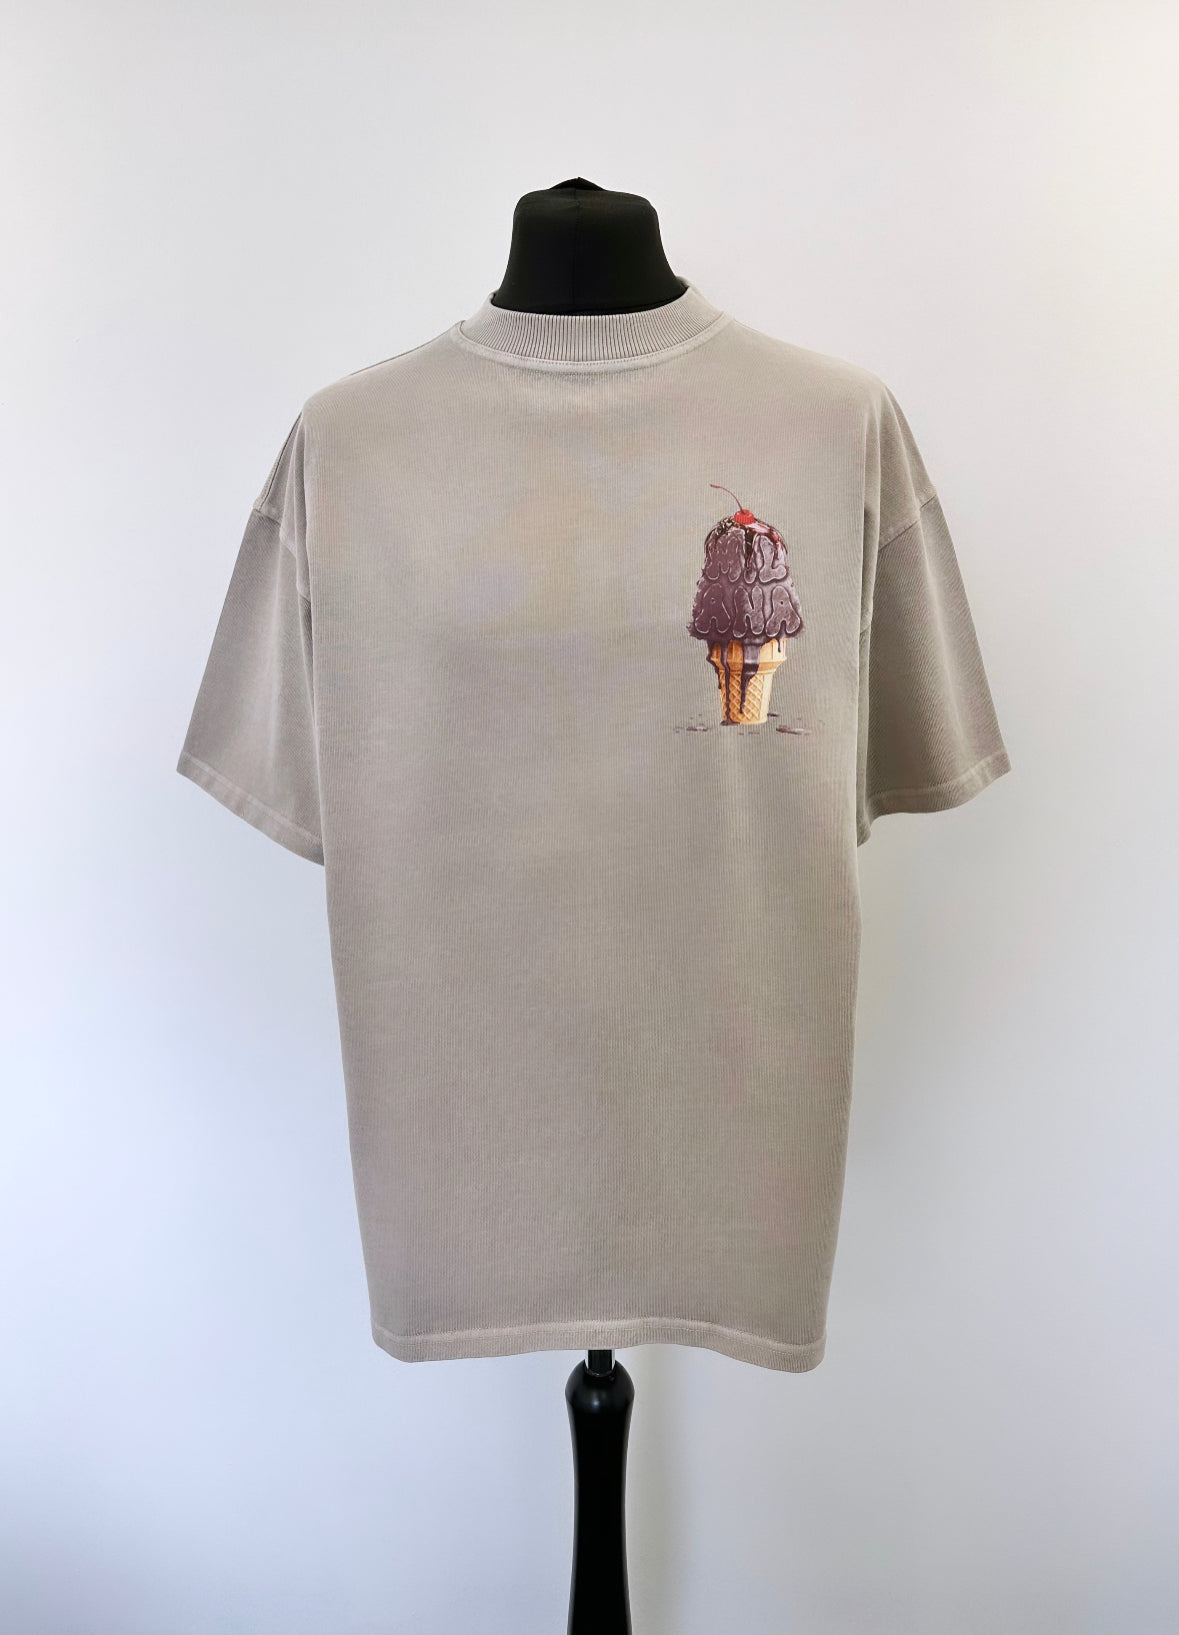 Washed Taupe Heavyweight Ice Cream T-shirt.